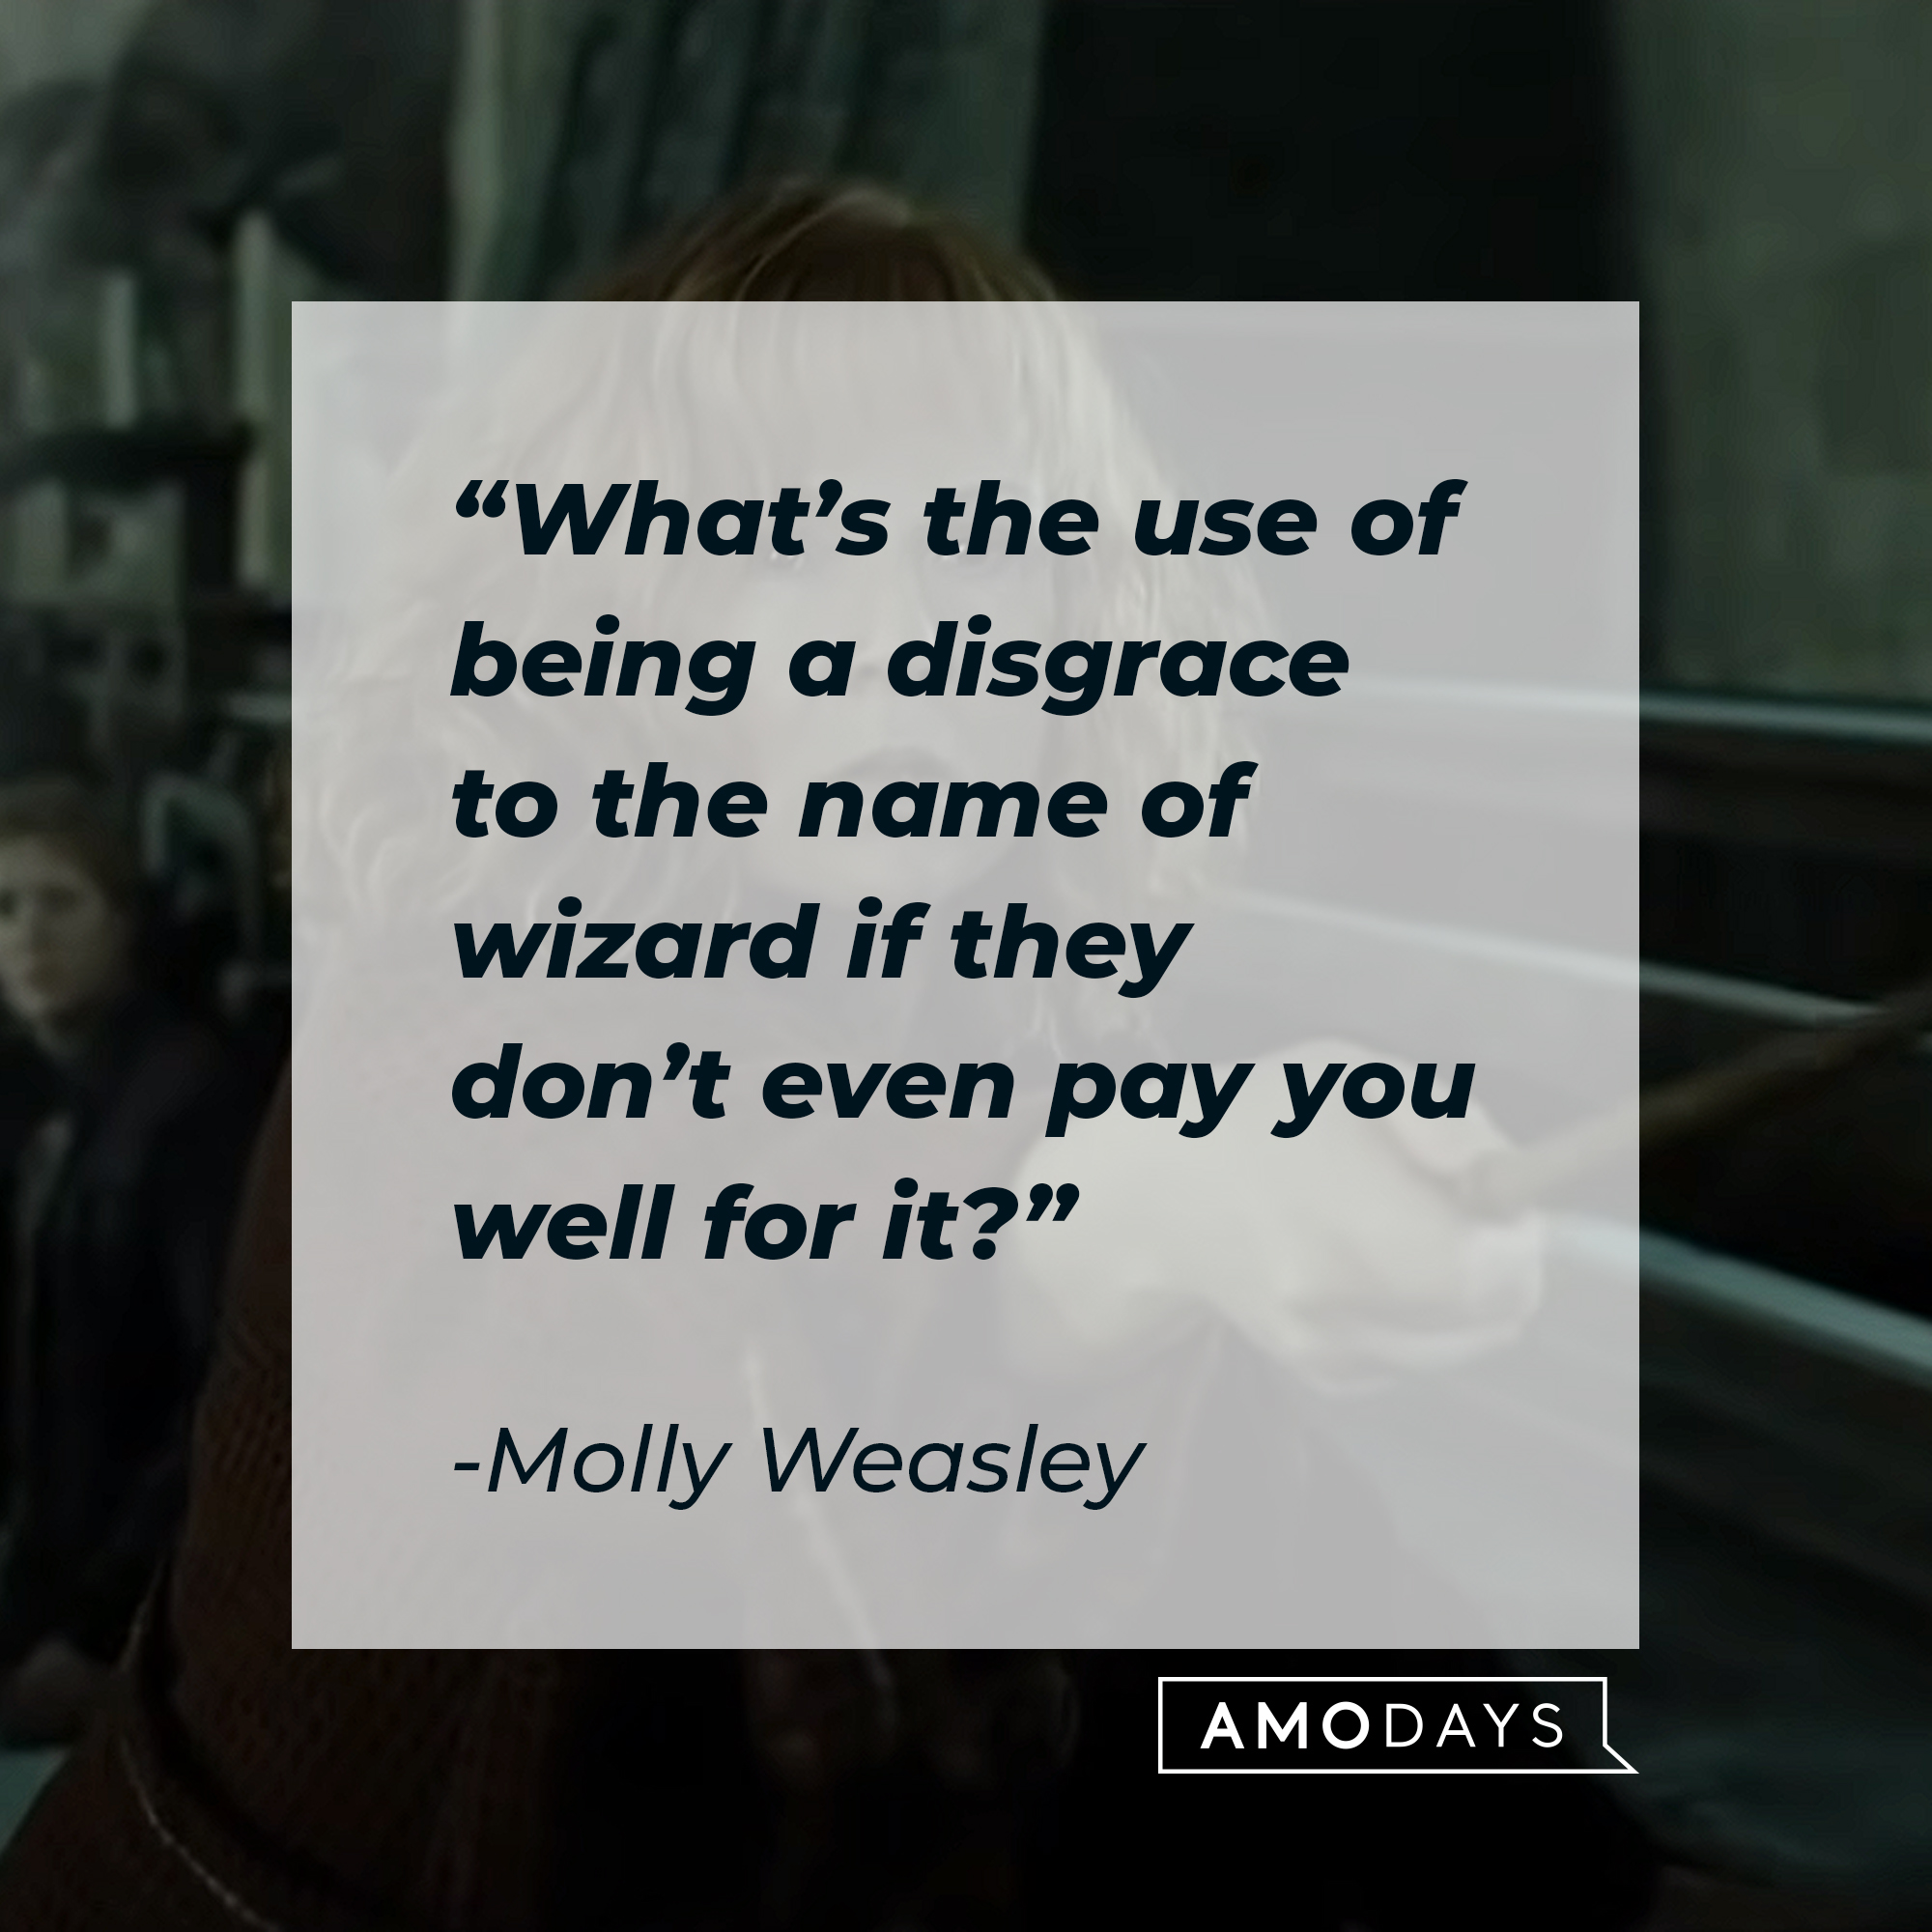 Molly Weasley's quote: "What’s the use of being a disgrace to the name of wizard if they don’t even pay you well for it?" | Source: Youtube.com/harrypotter